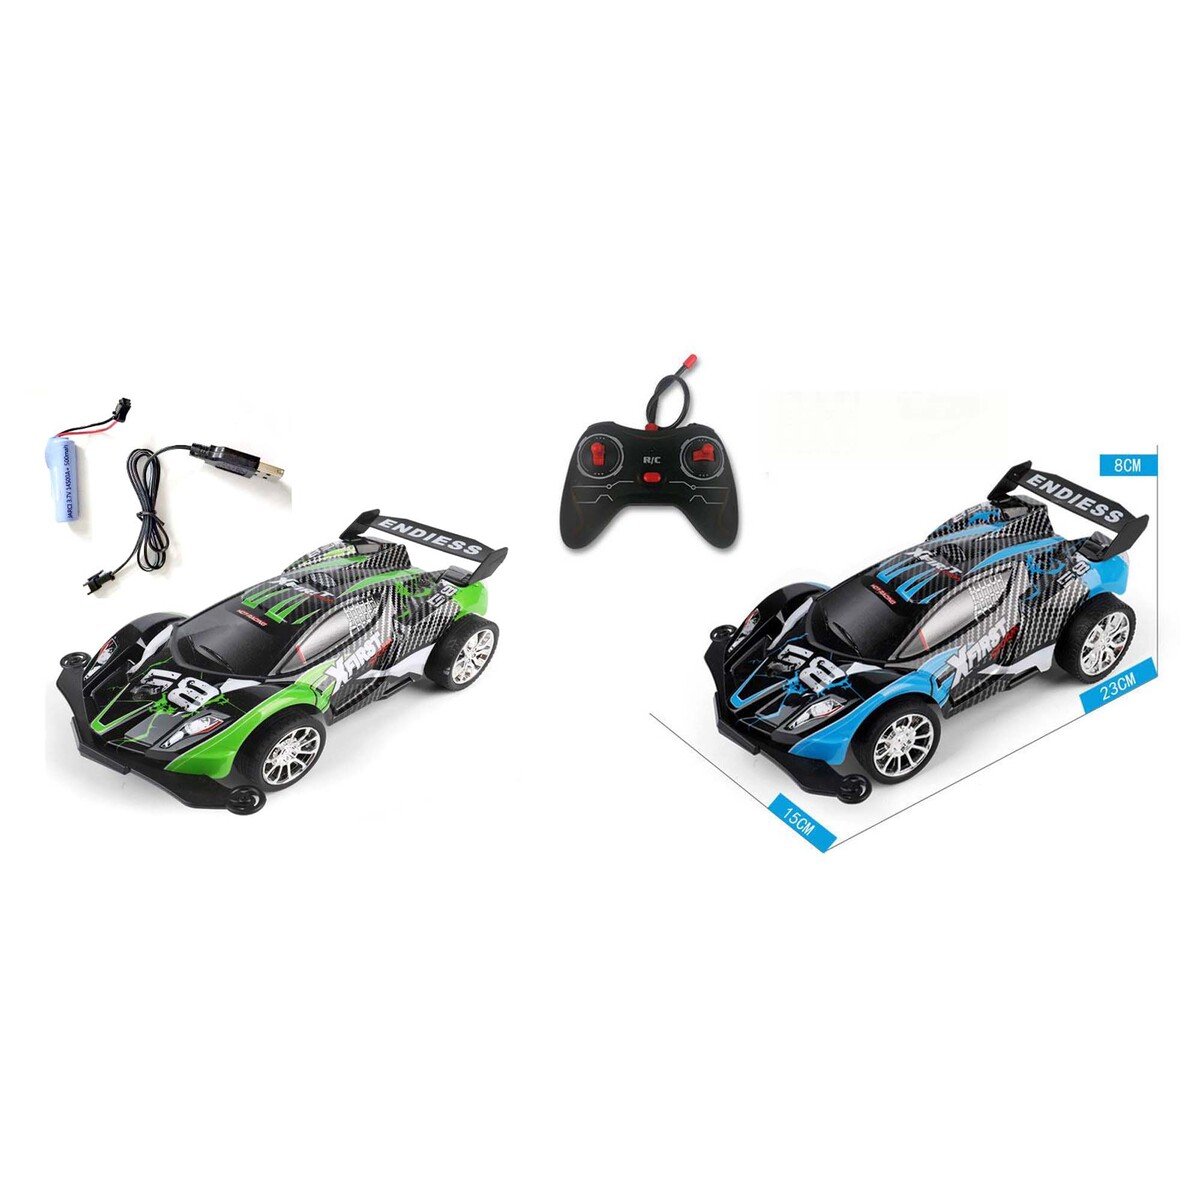 Skid Fusion Rechargeable Remote Control Car 863B-2